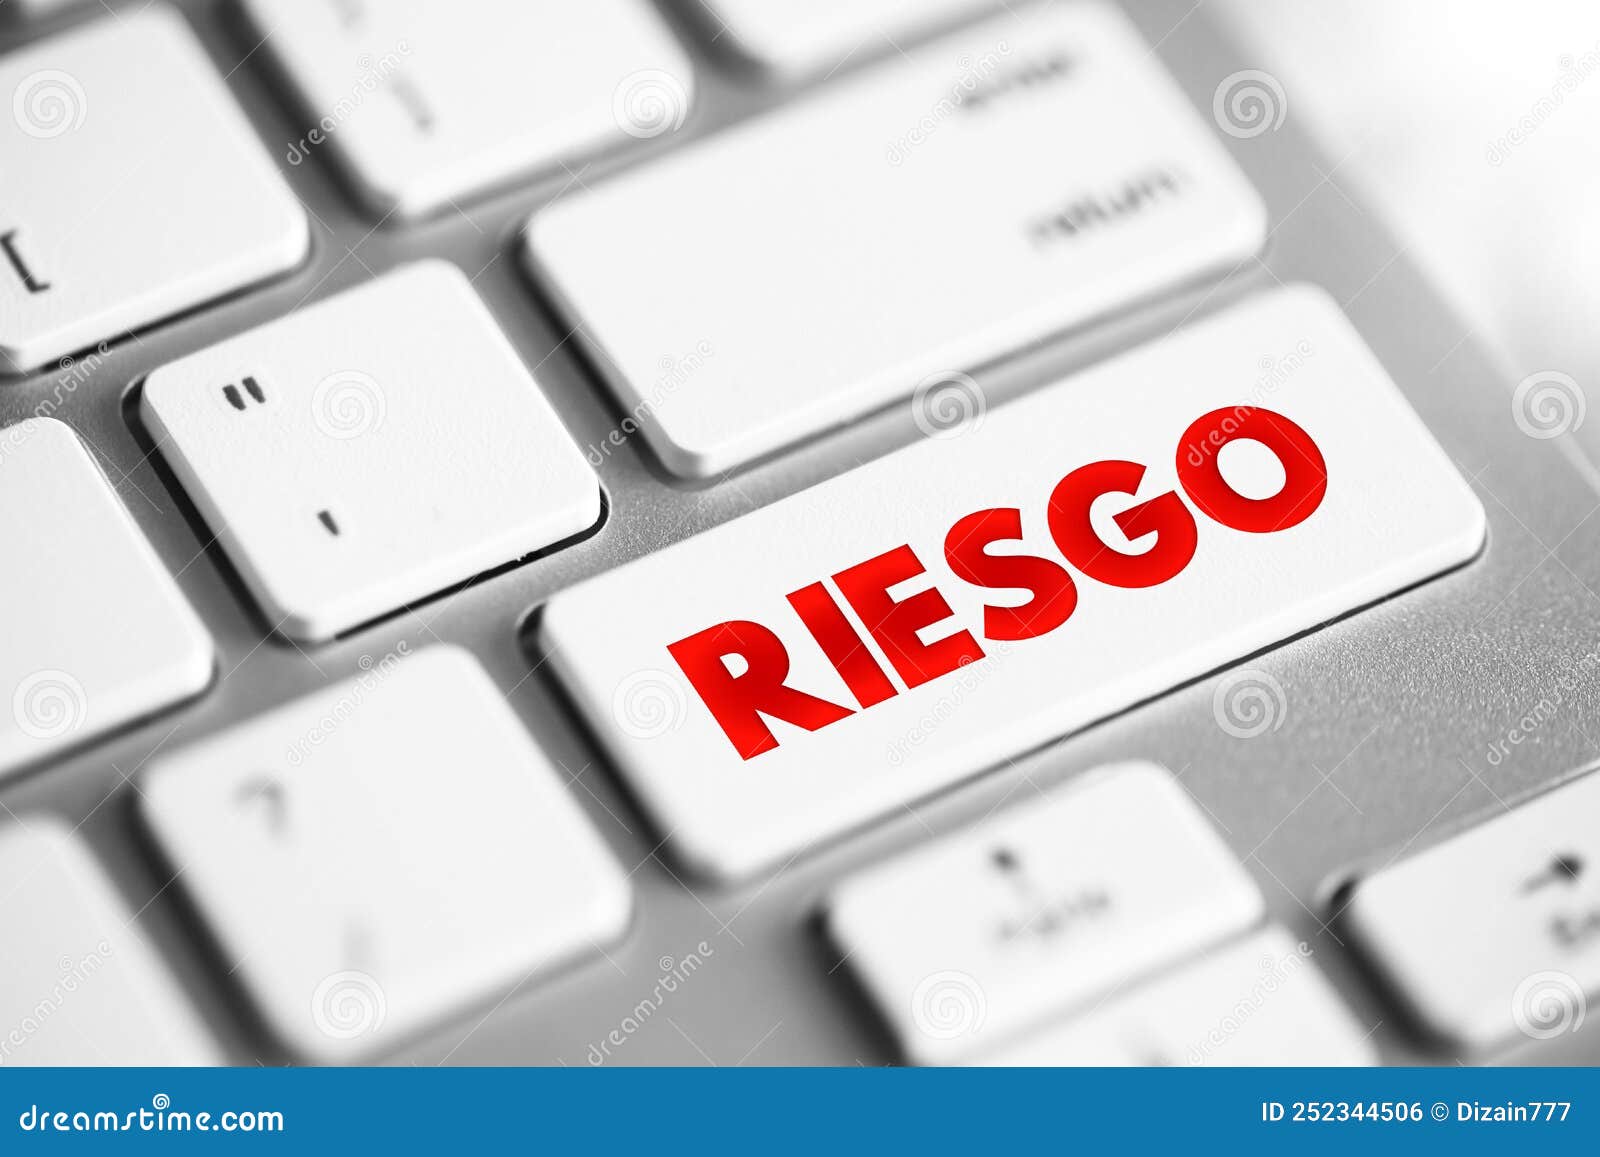 riesgo spanish words for risk text button on keyboard, concept background